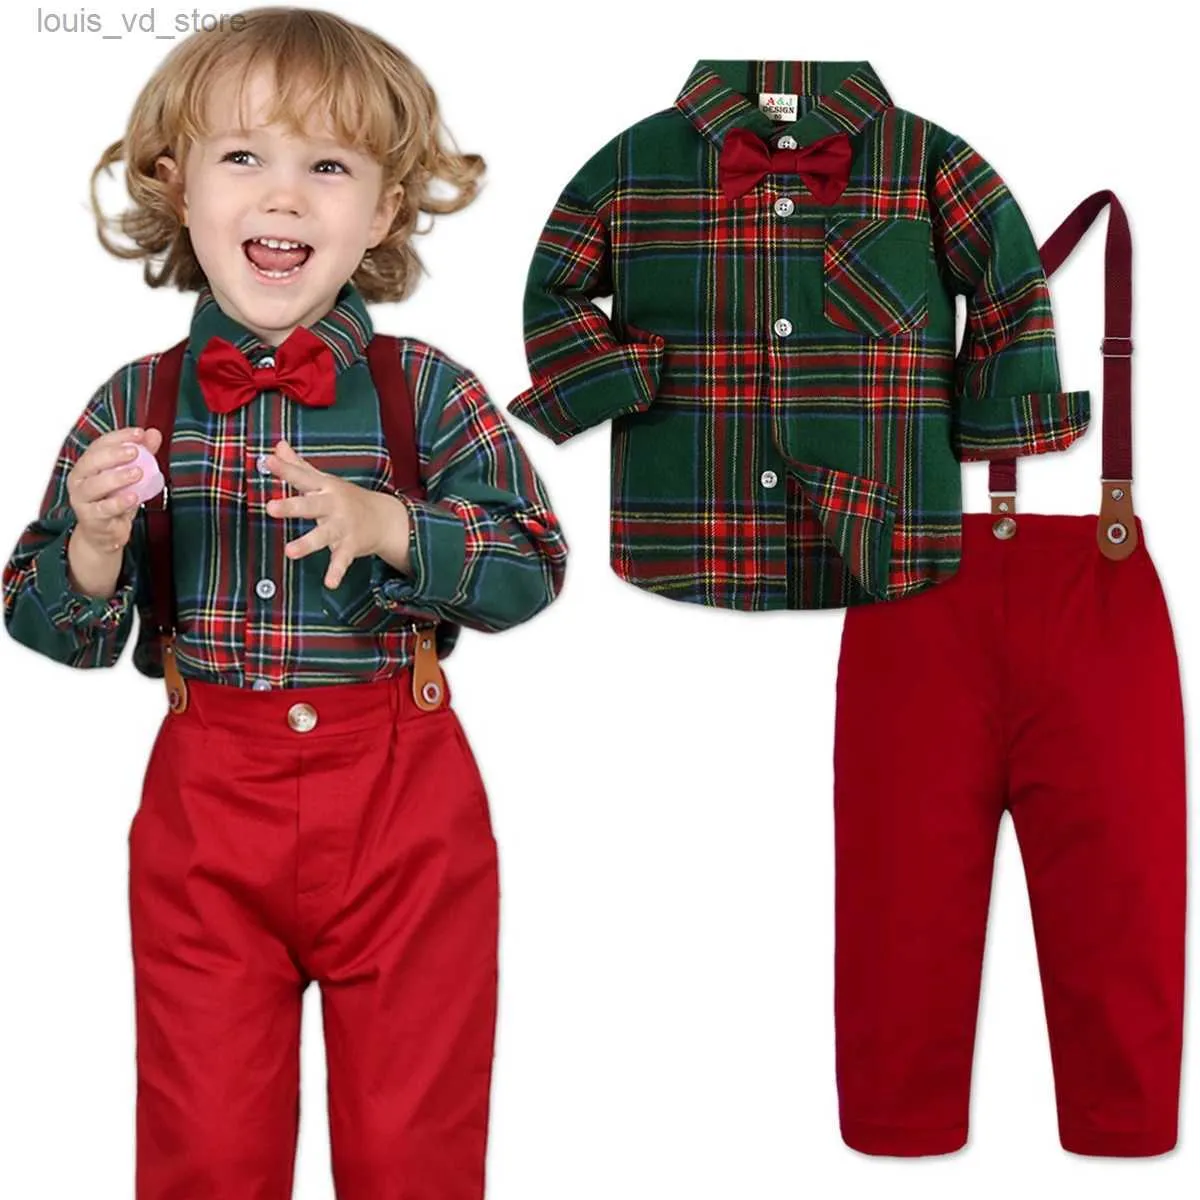 Clothing Sets Baby Christmas Outfit Boy Kids Gentleman Formal Suit Toddler Suspenders Clothing Set Infant Party Dress Shirt T240415